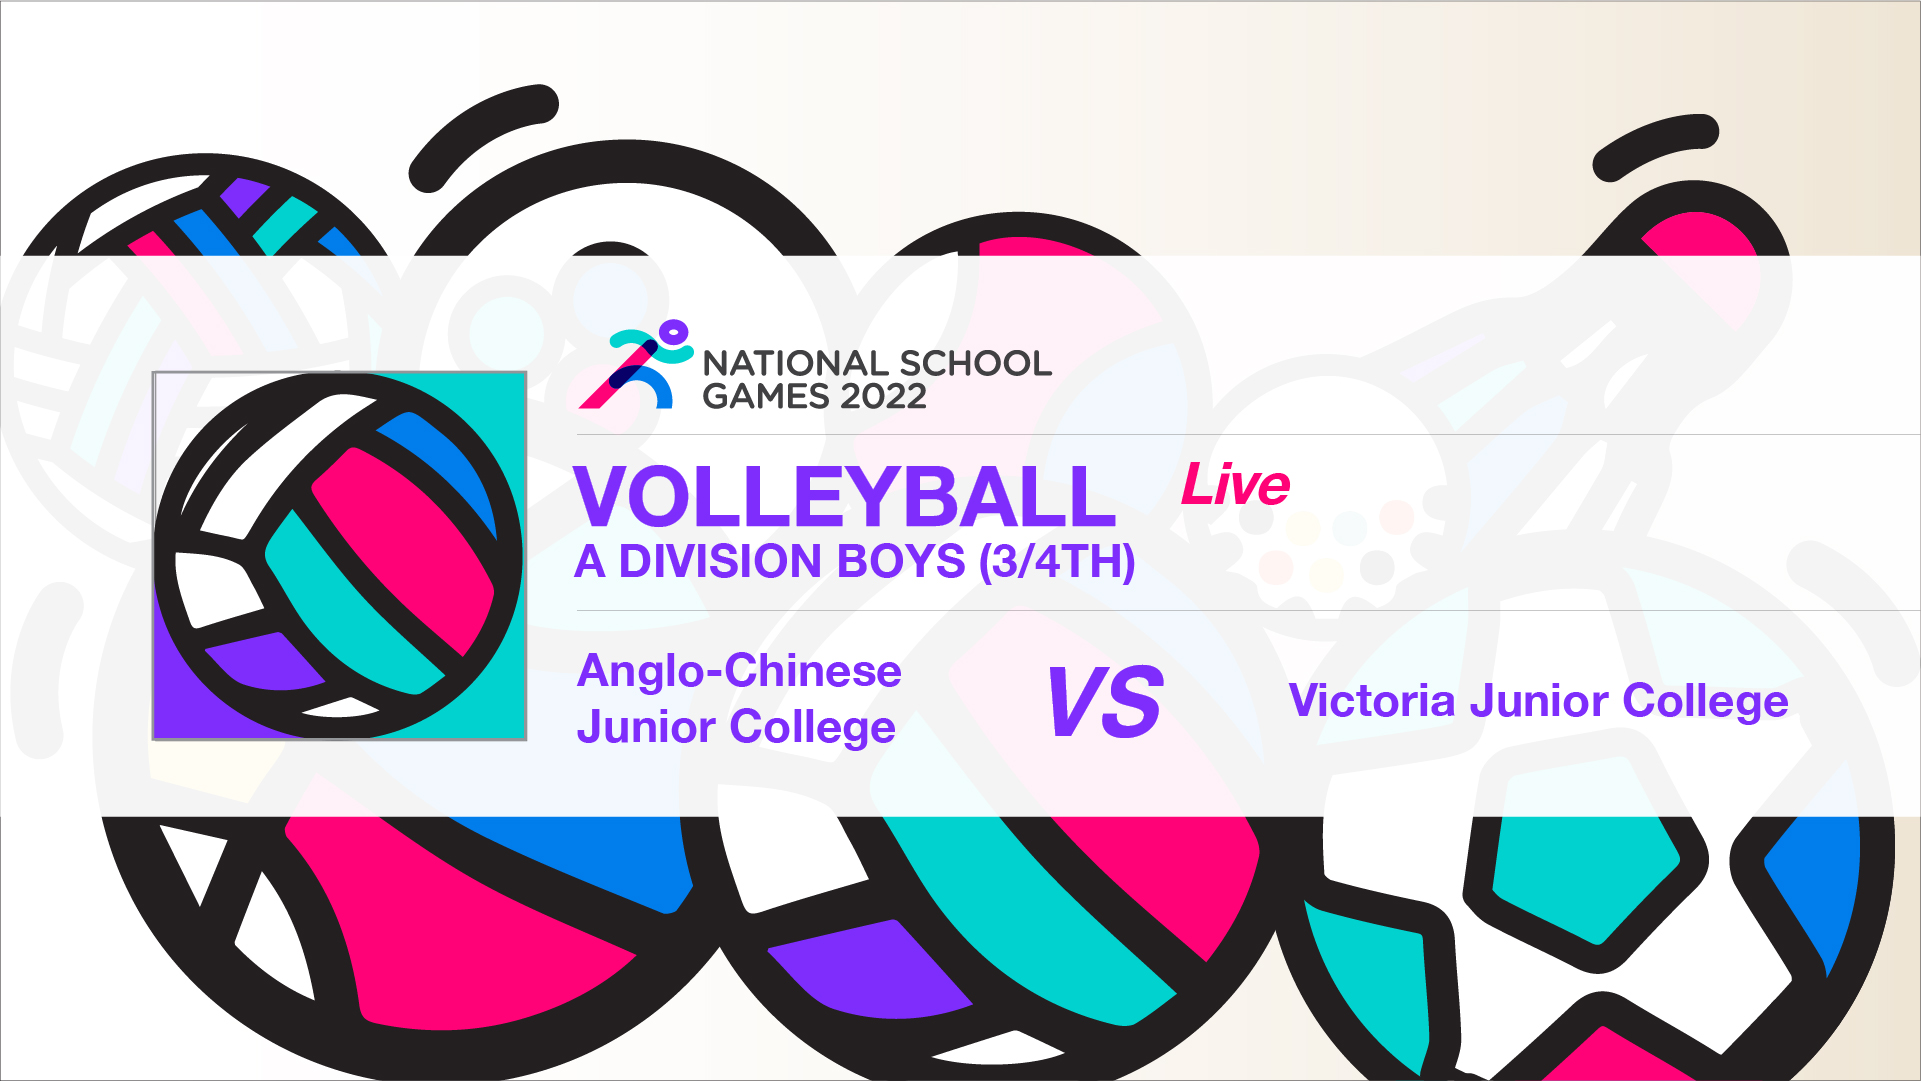 SSSC Volleyball A Division Boys 3rd/4th | Anglo-Chinese Junior College vs Victoria Junior College